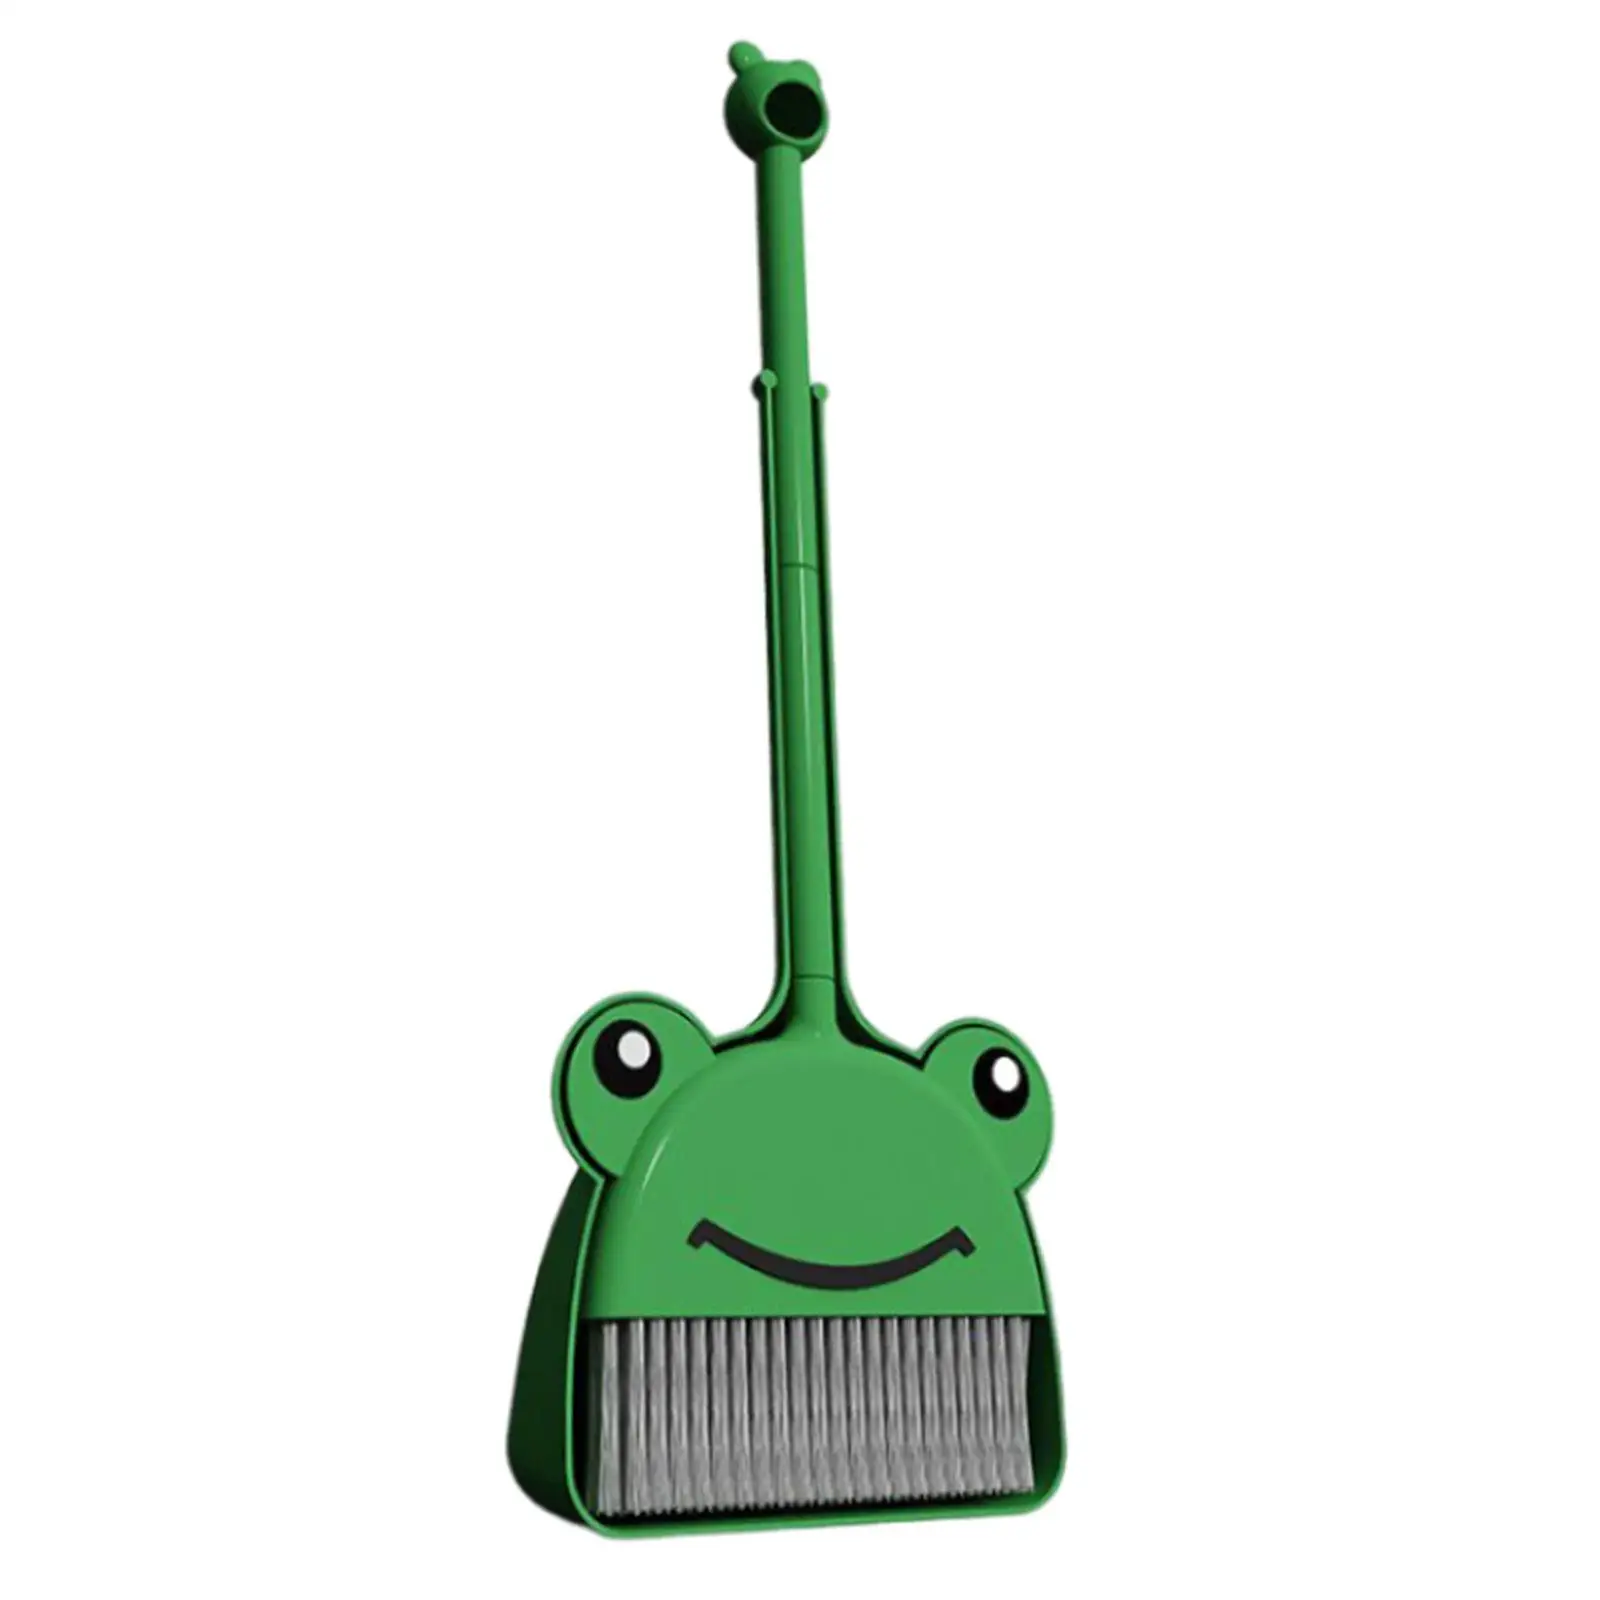 Mini Broom with Dustpan Holiday Gifts Educational Lovely Frog Theme Housekeeping Play Set for Kindergarten Preschool Boys Girls